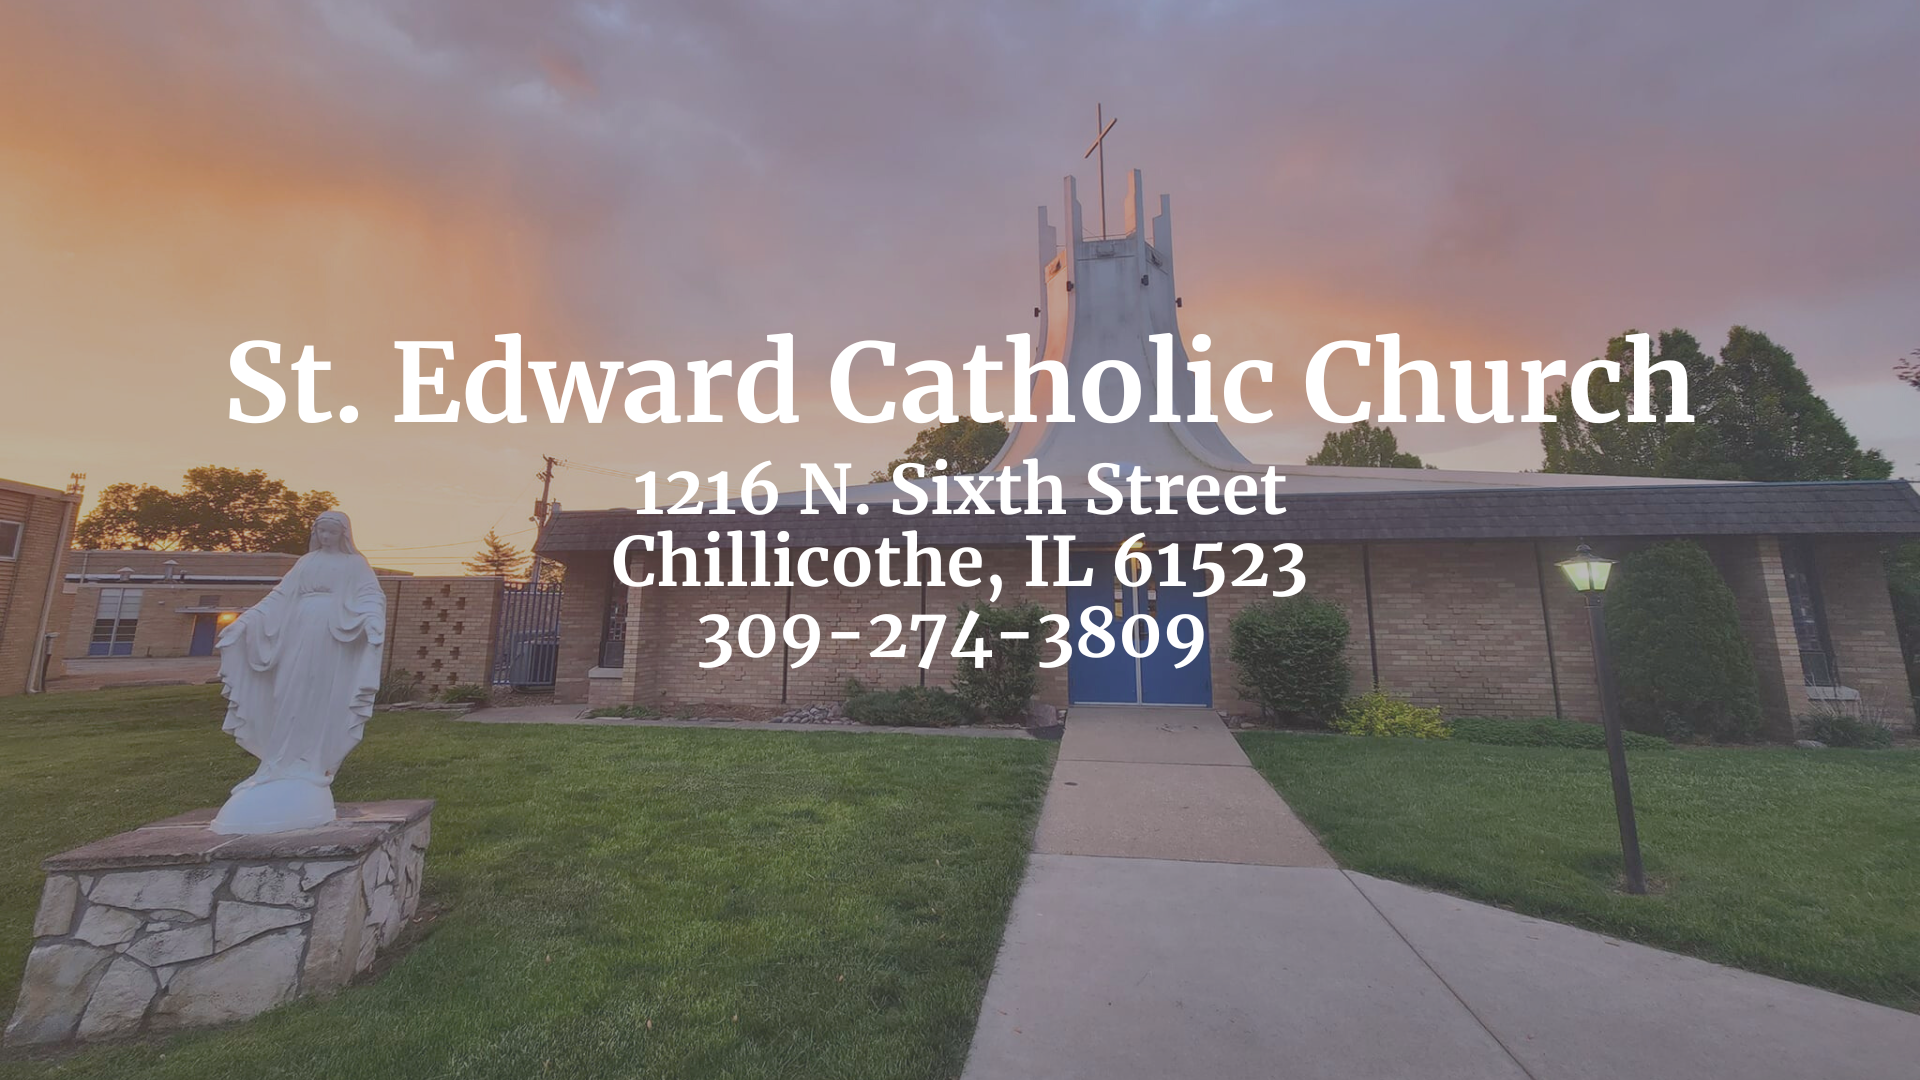 An image of St. Edward Church with the address and phone number overlaid